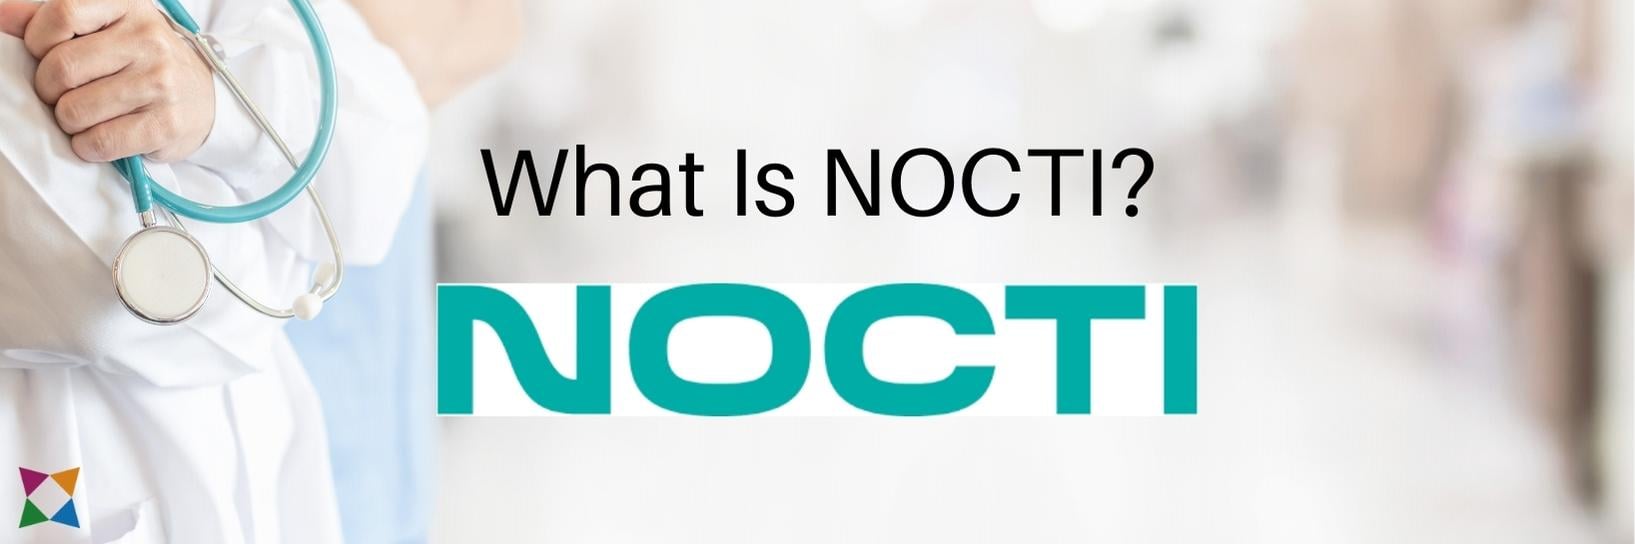 What Is NOCTI?